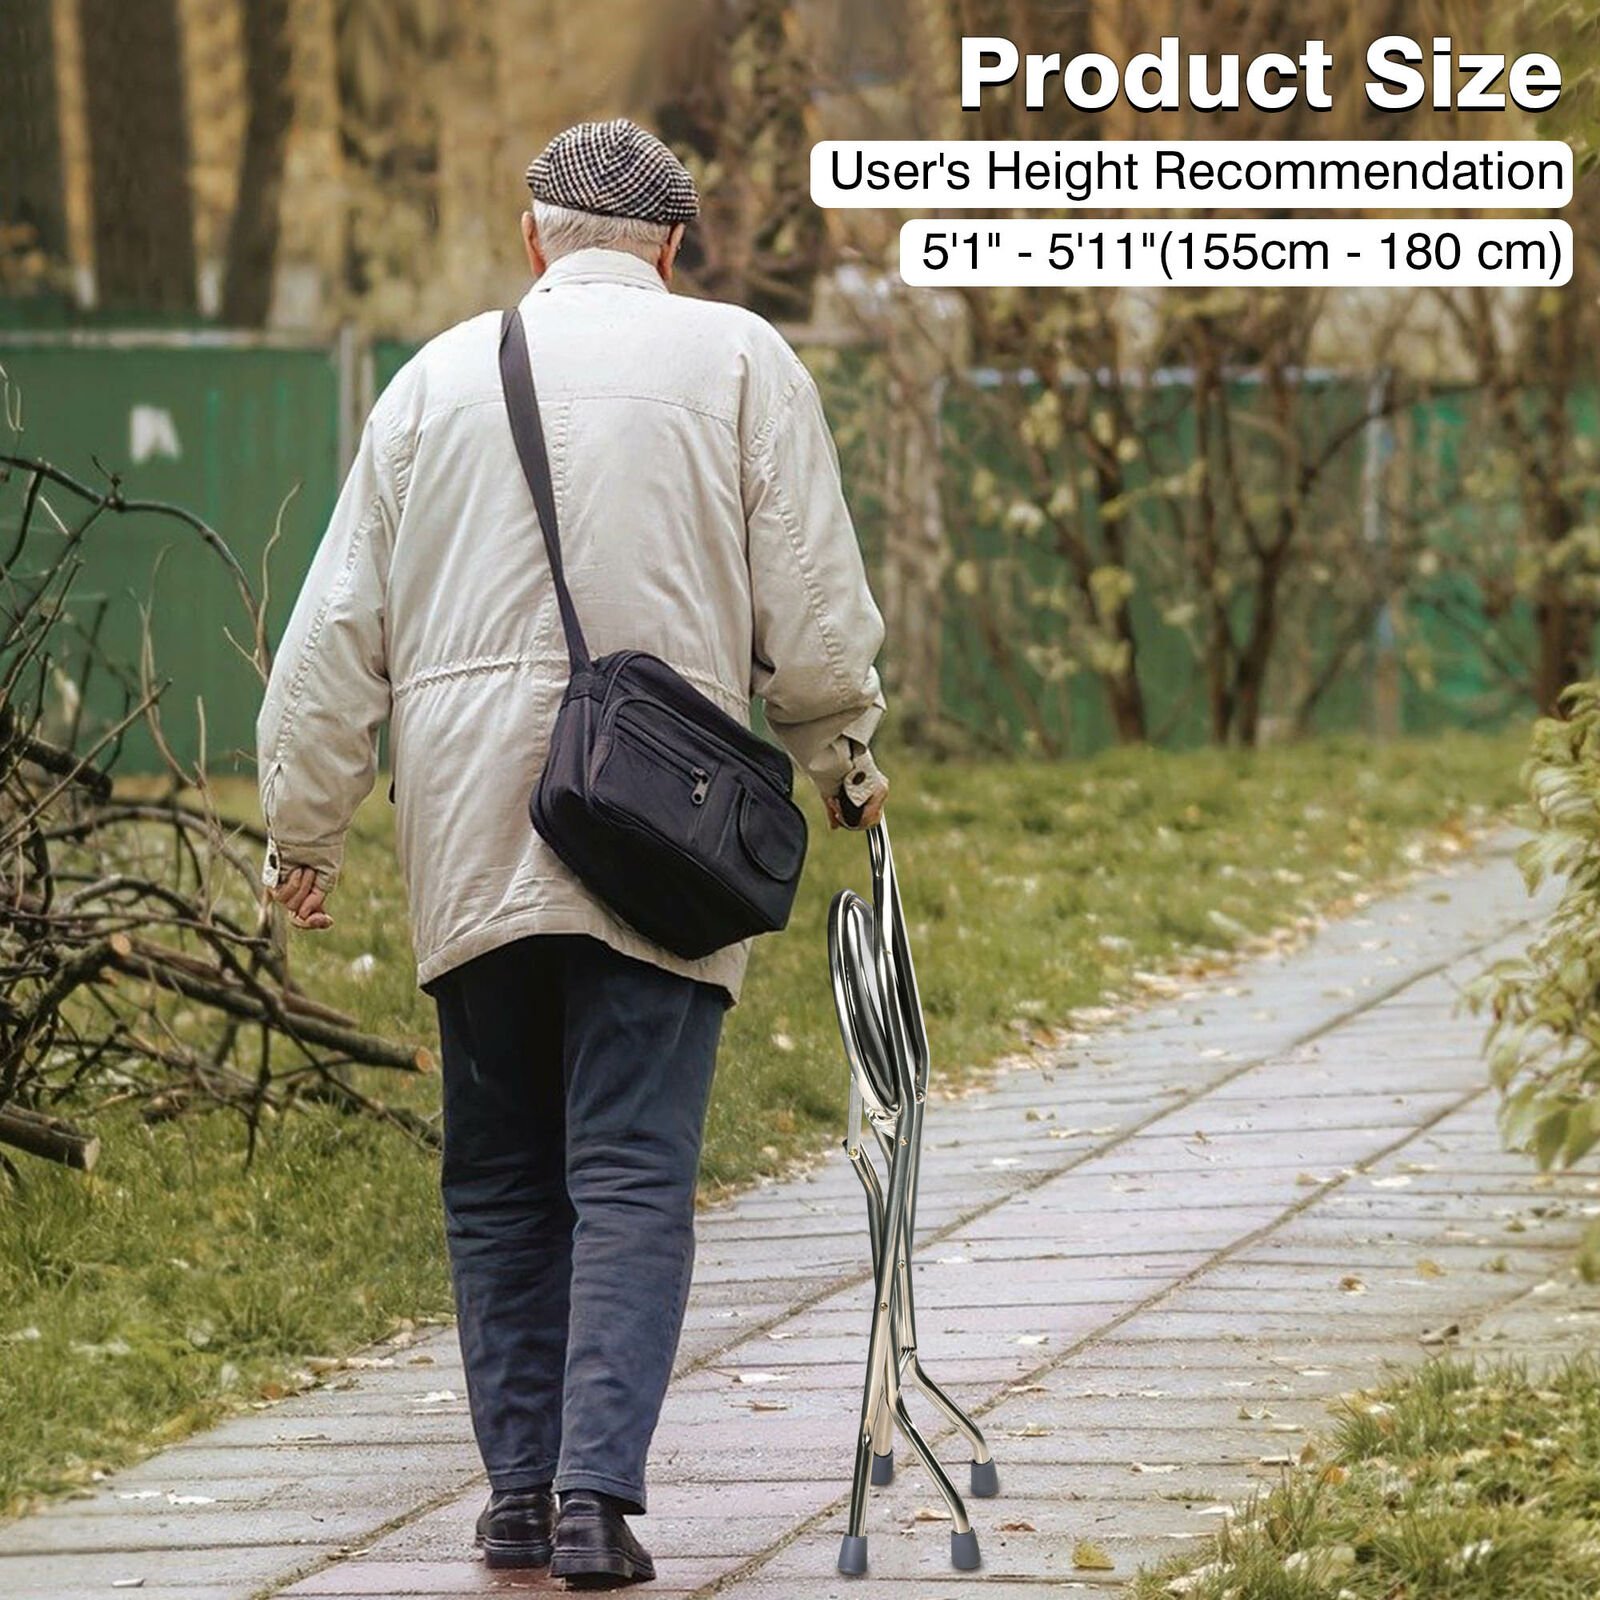 Image 21 - Yescom Medical Folding Walking Stick with Seat Portable Travel Cane Hiking Chair